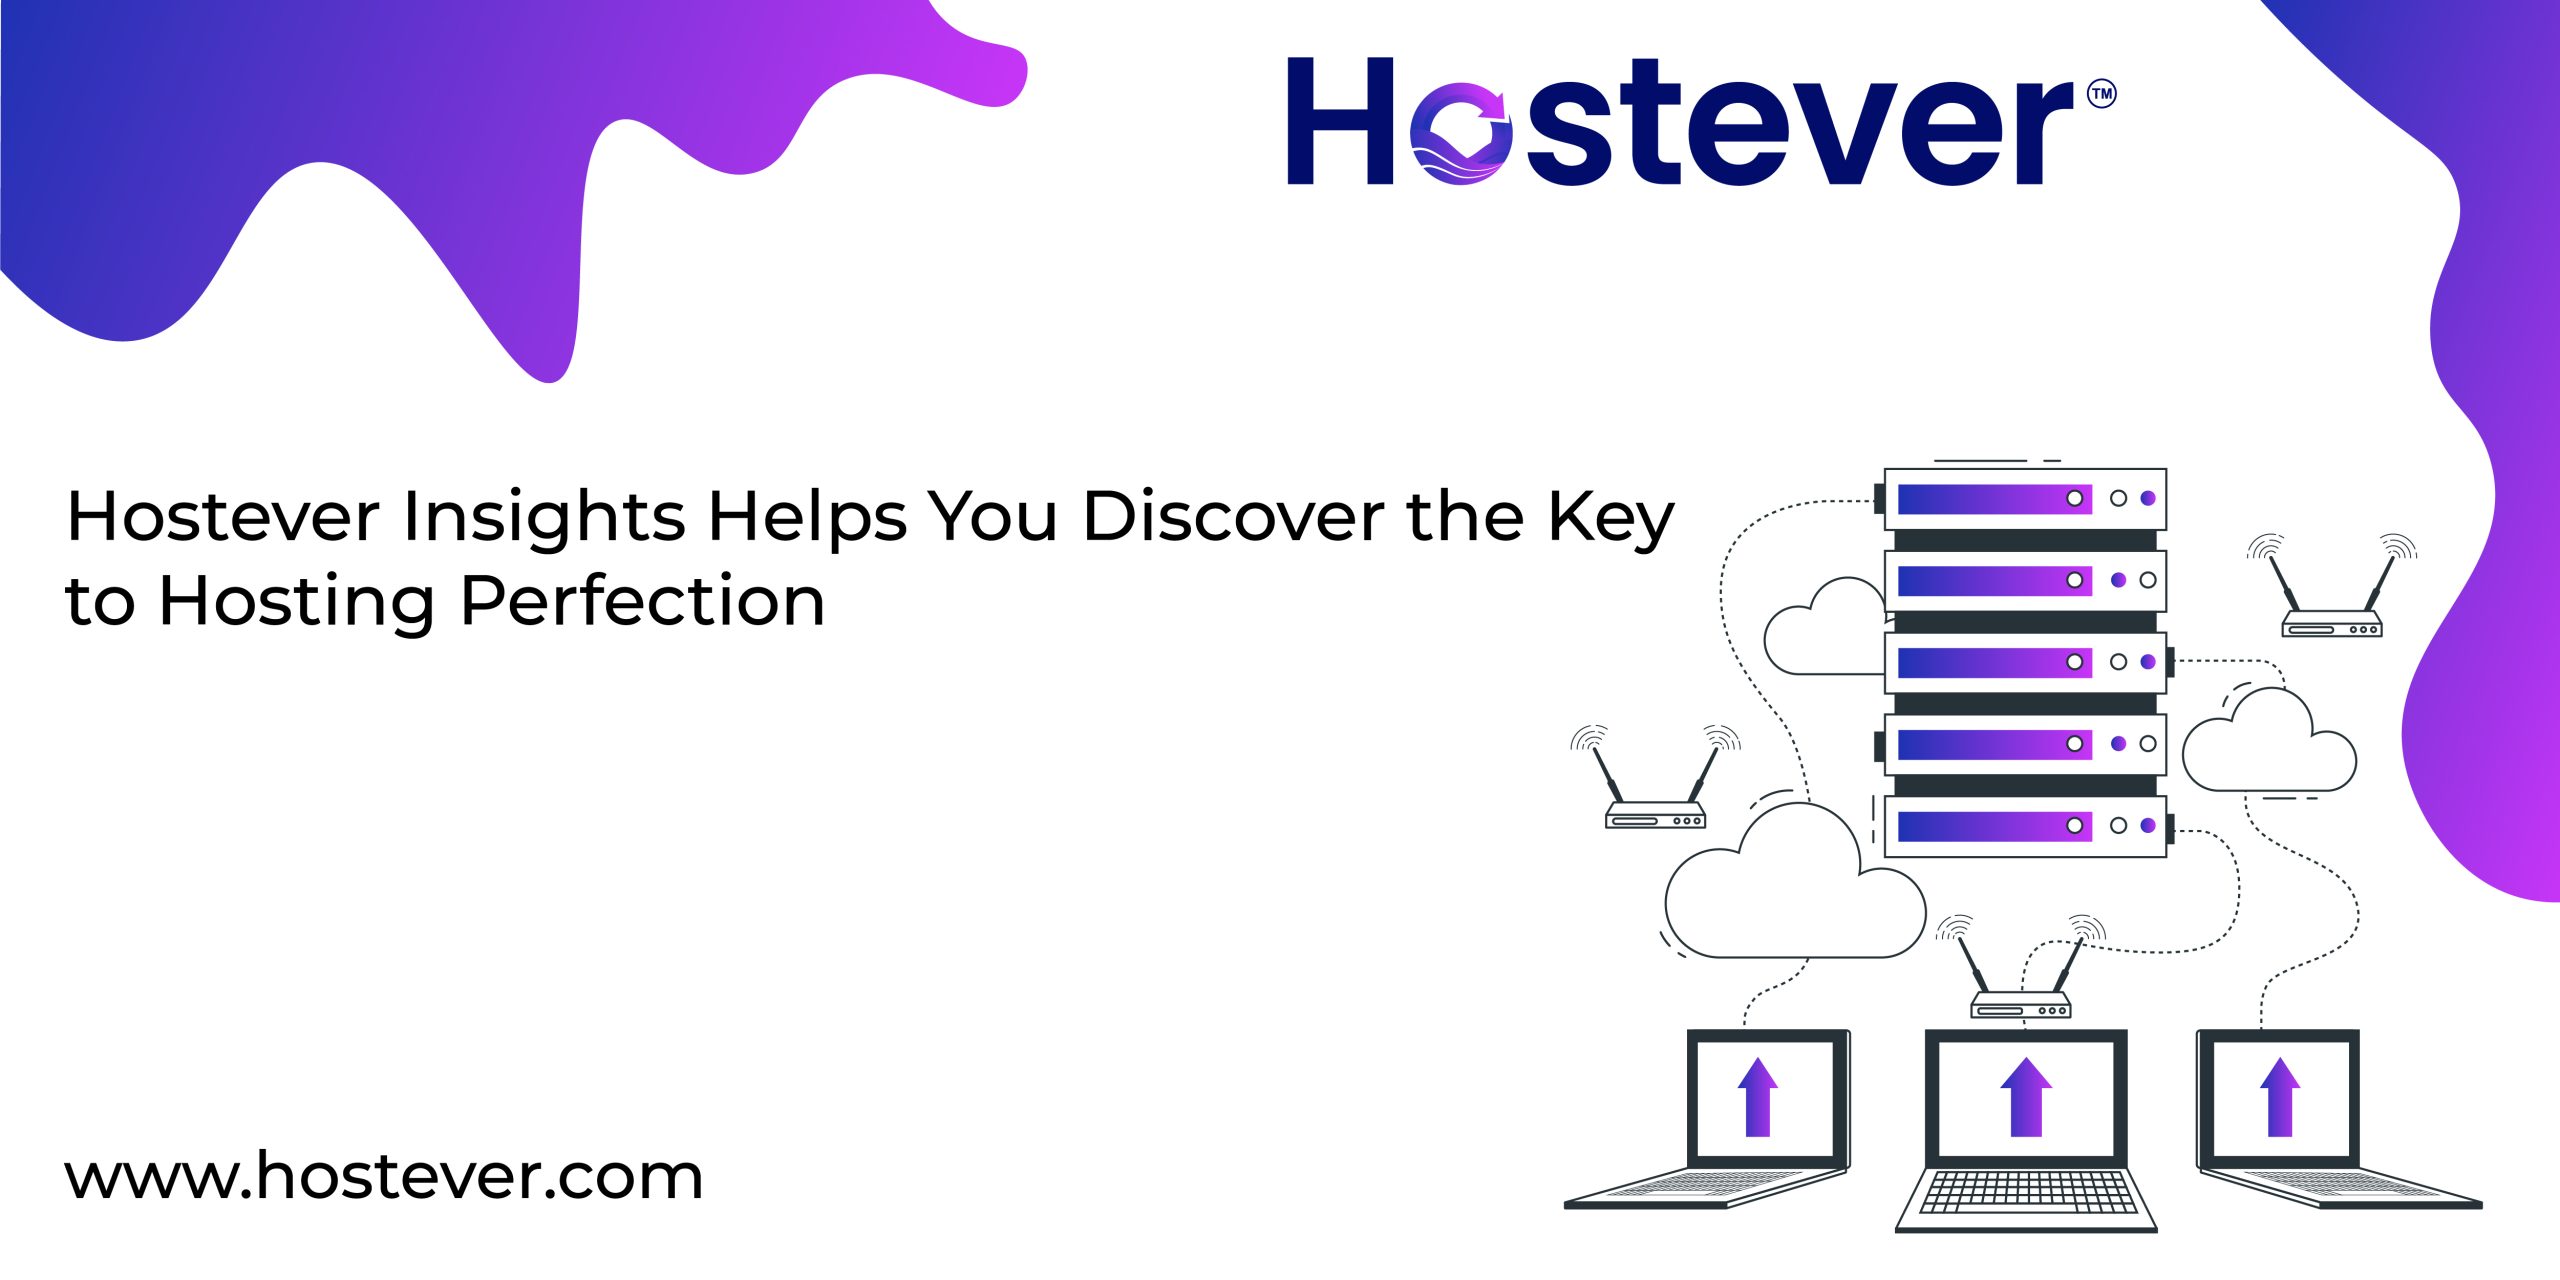 Hostever Insights Helps You Discover the Key to Hosting Perfection 01 scaled